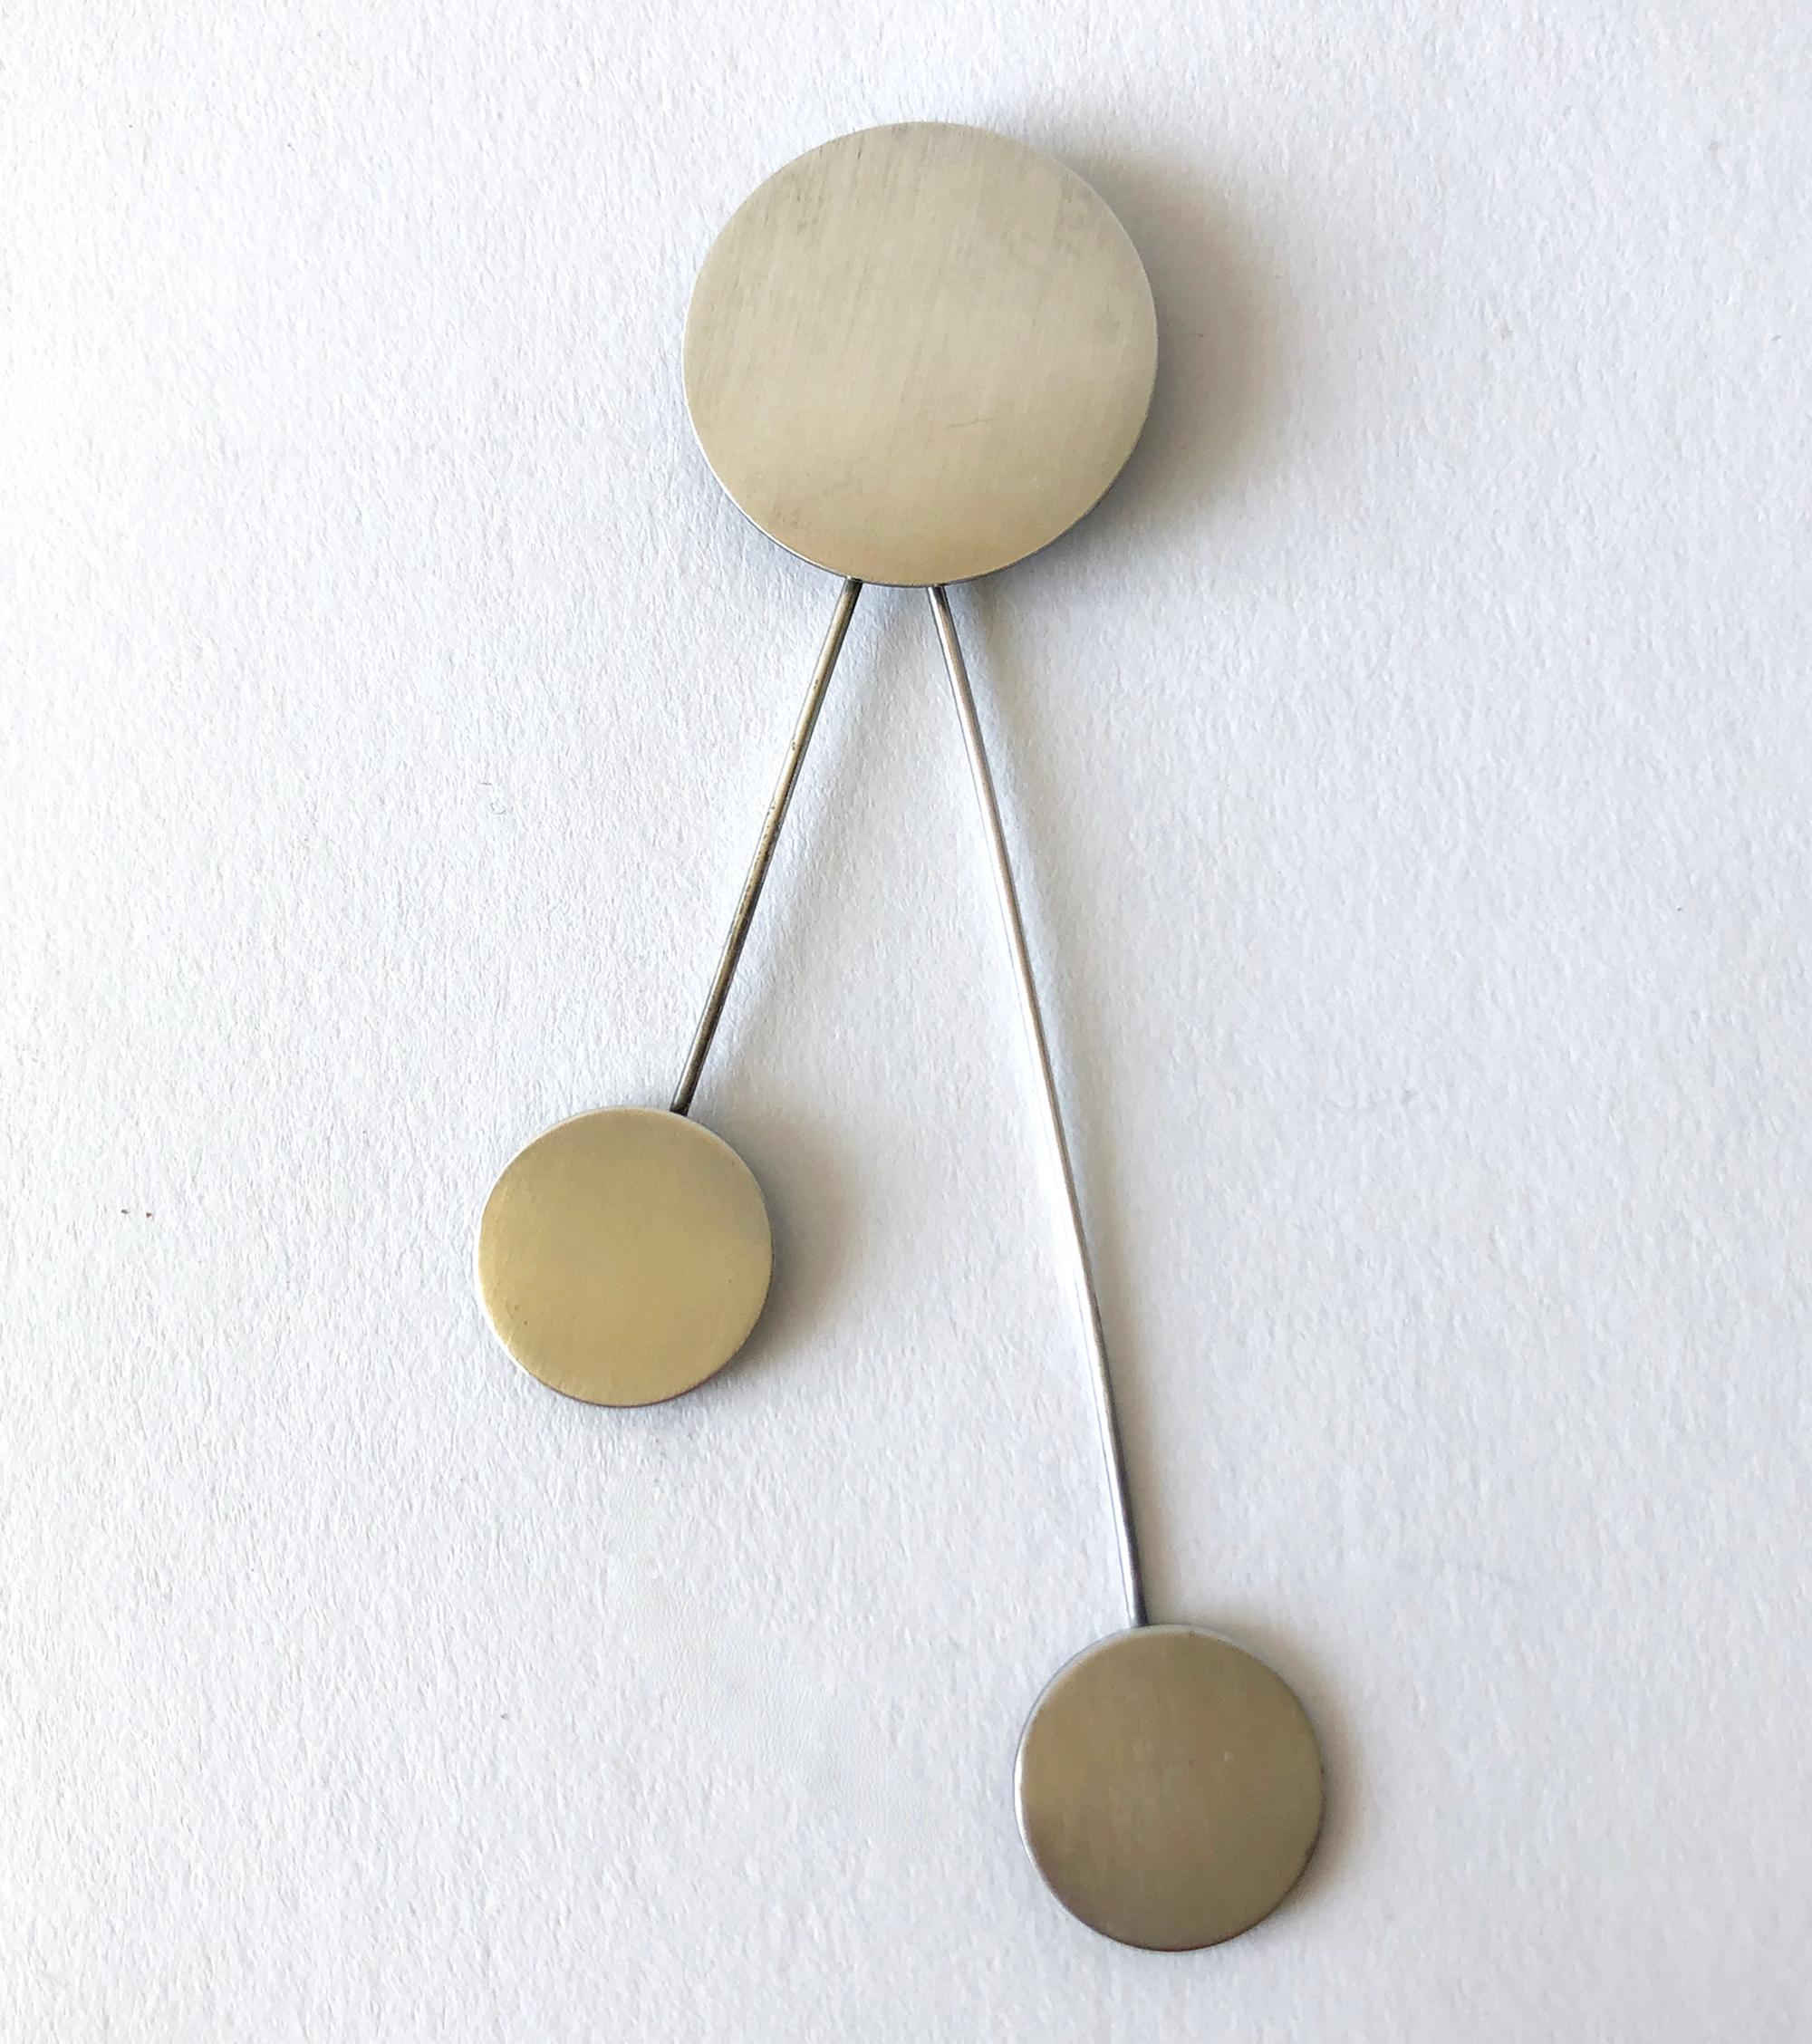 Kinetic brushed sterling silver disc brooch created by master silversmith Betty Cooke of Baltimore, Maryland.  Brooch measures 3.75